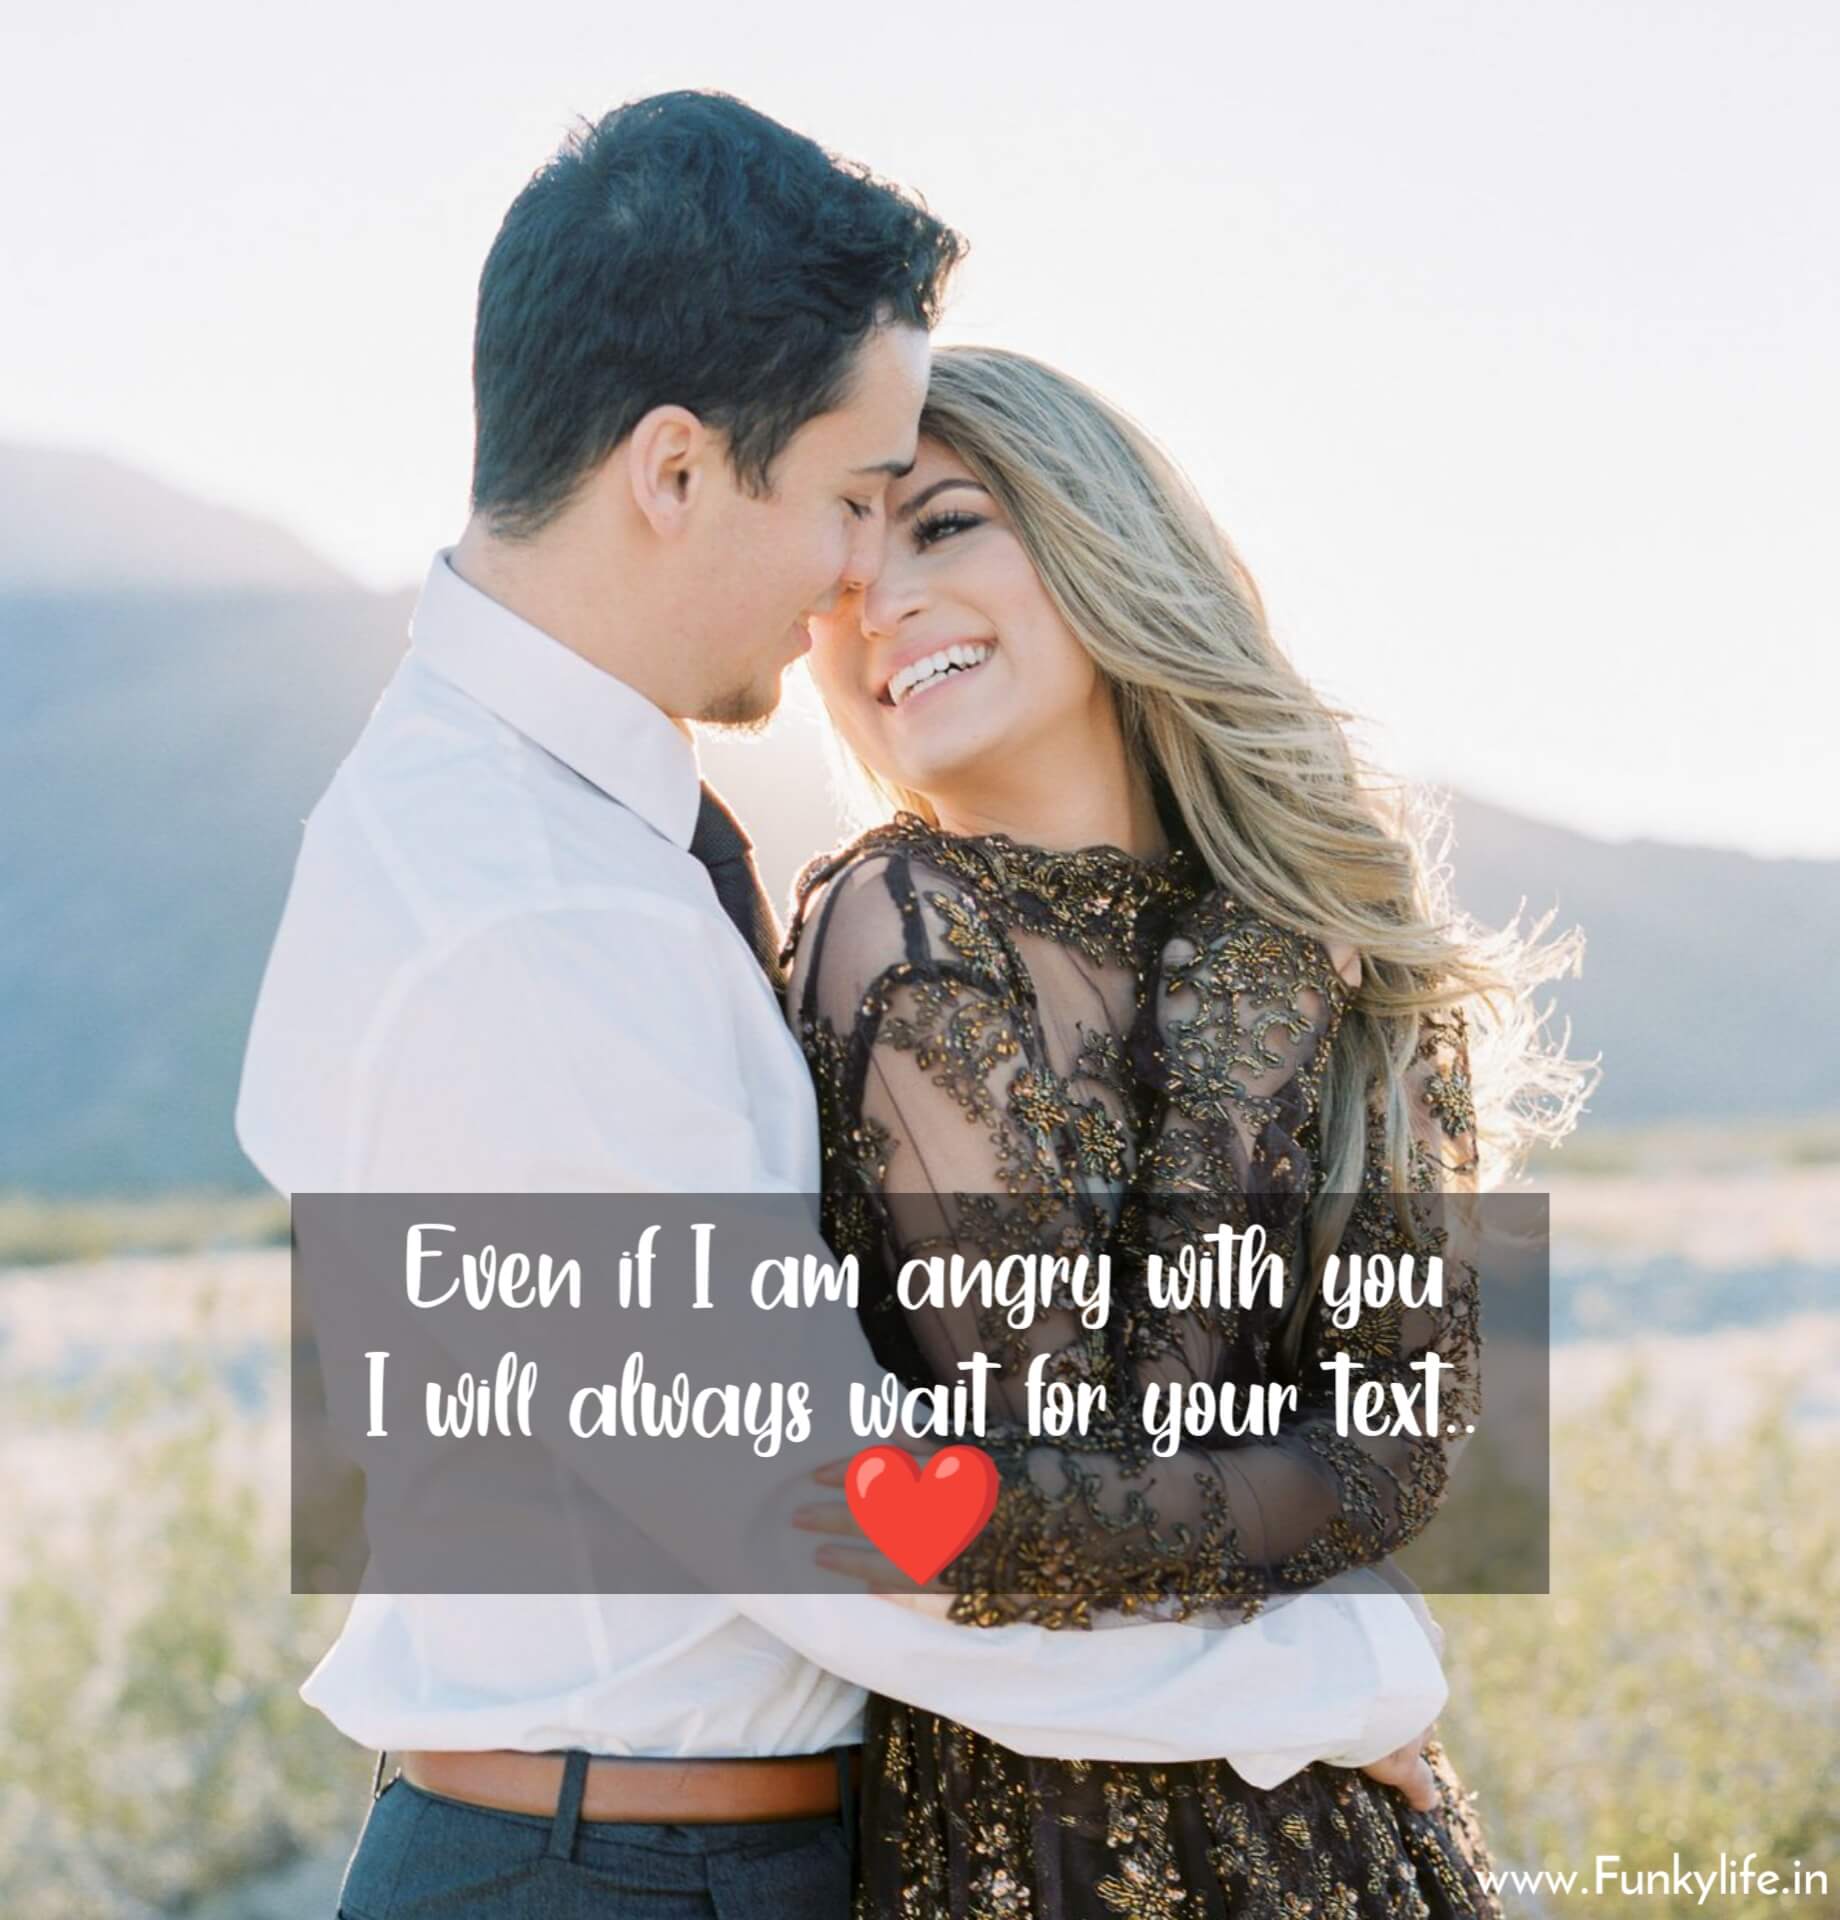 Best love and dating quotes for her in hindi 2022